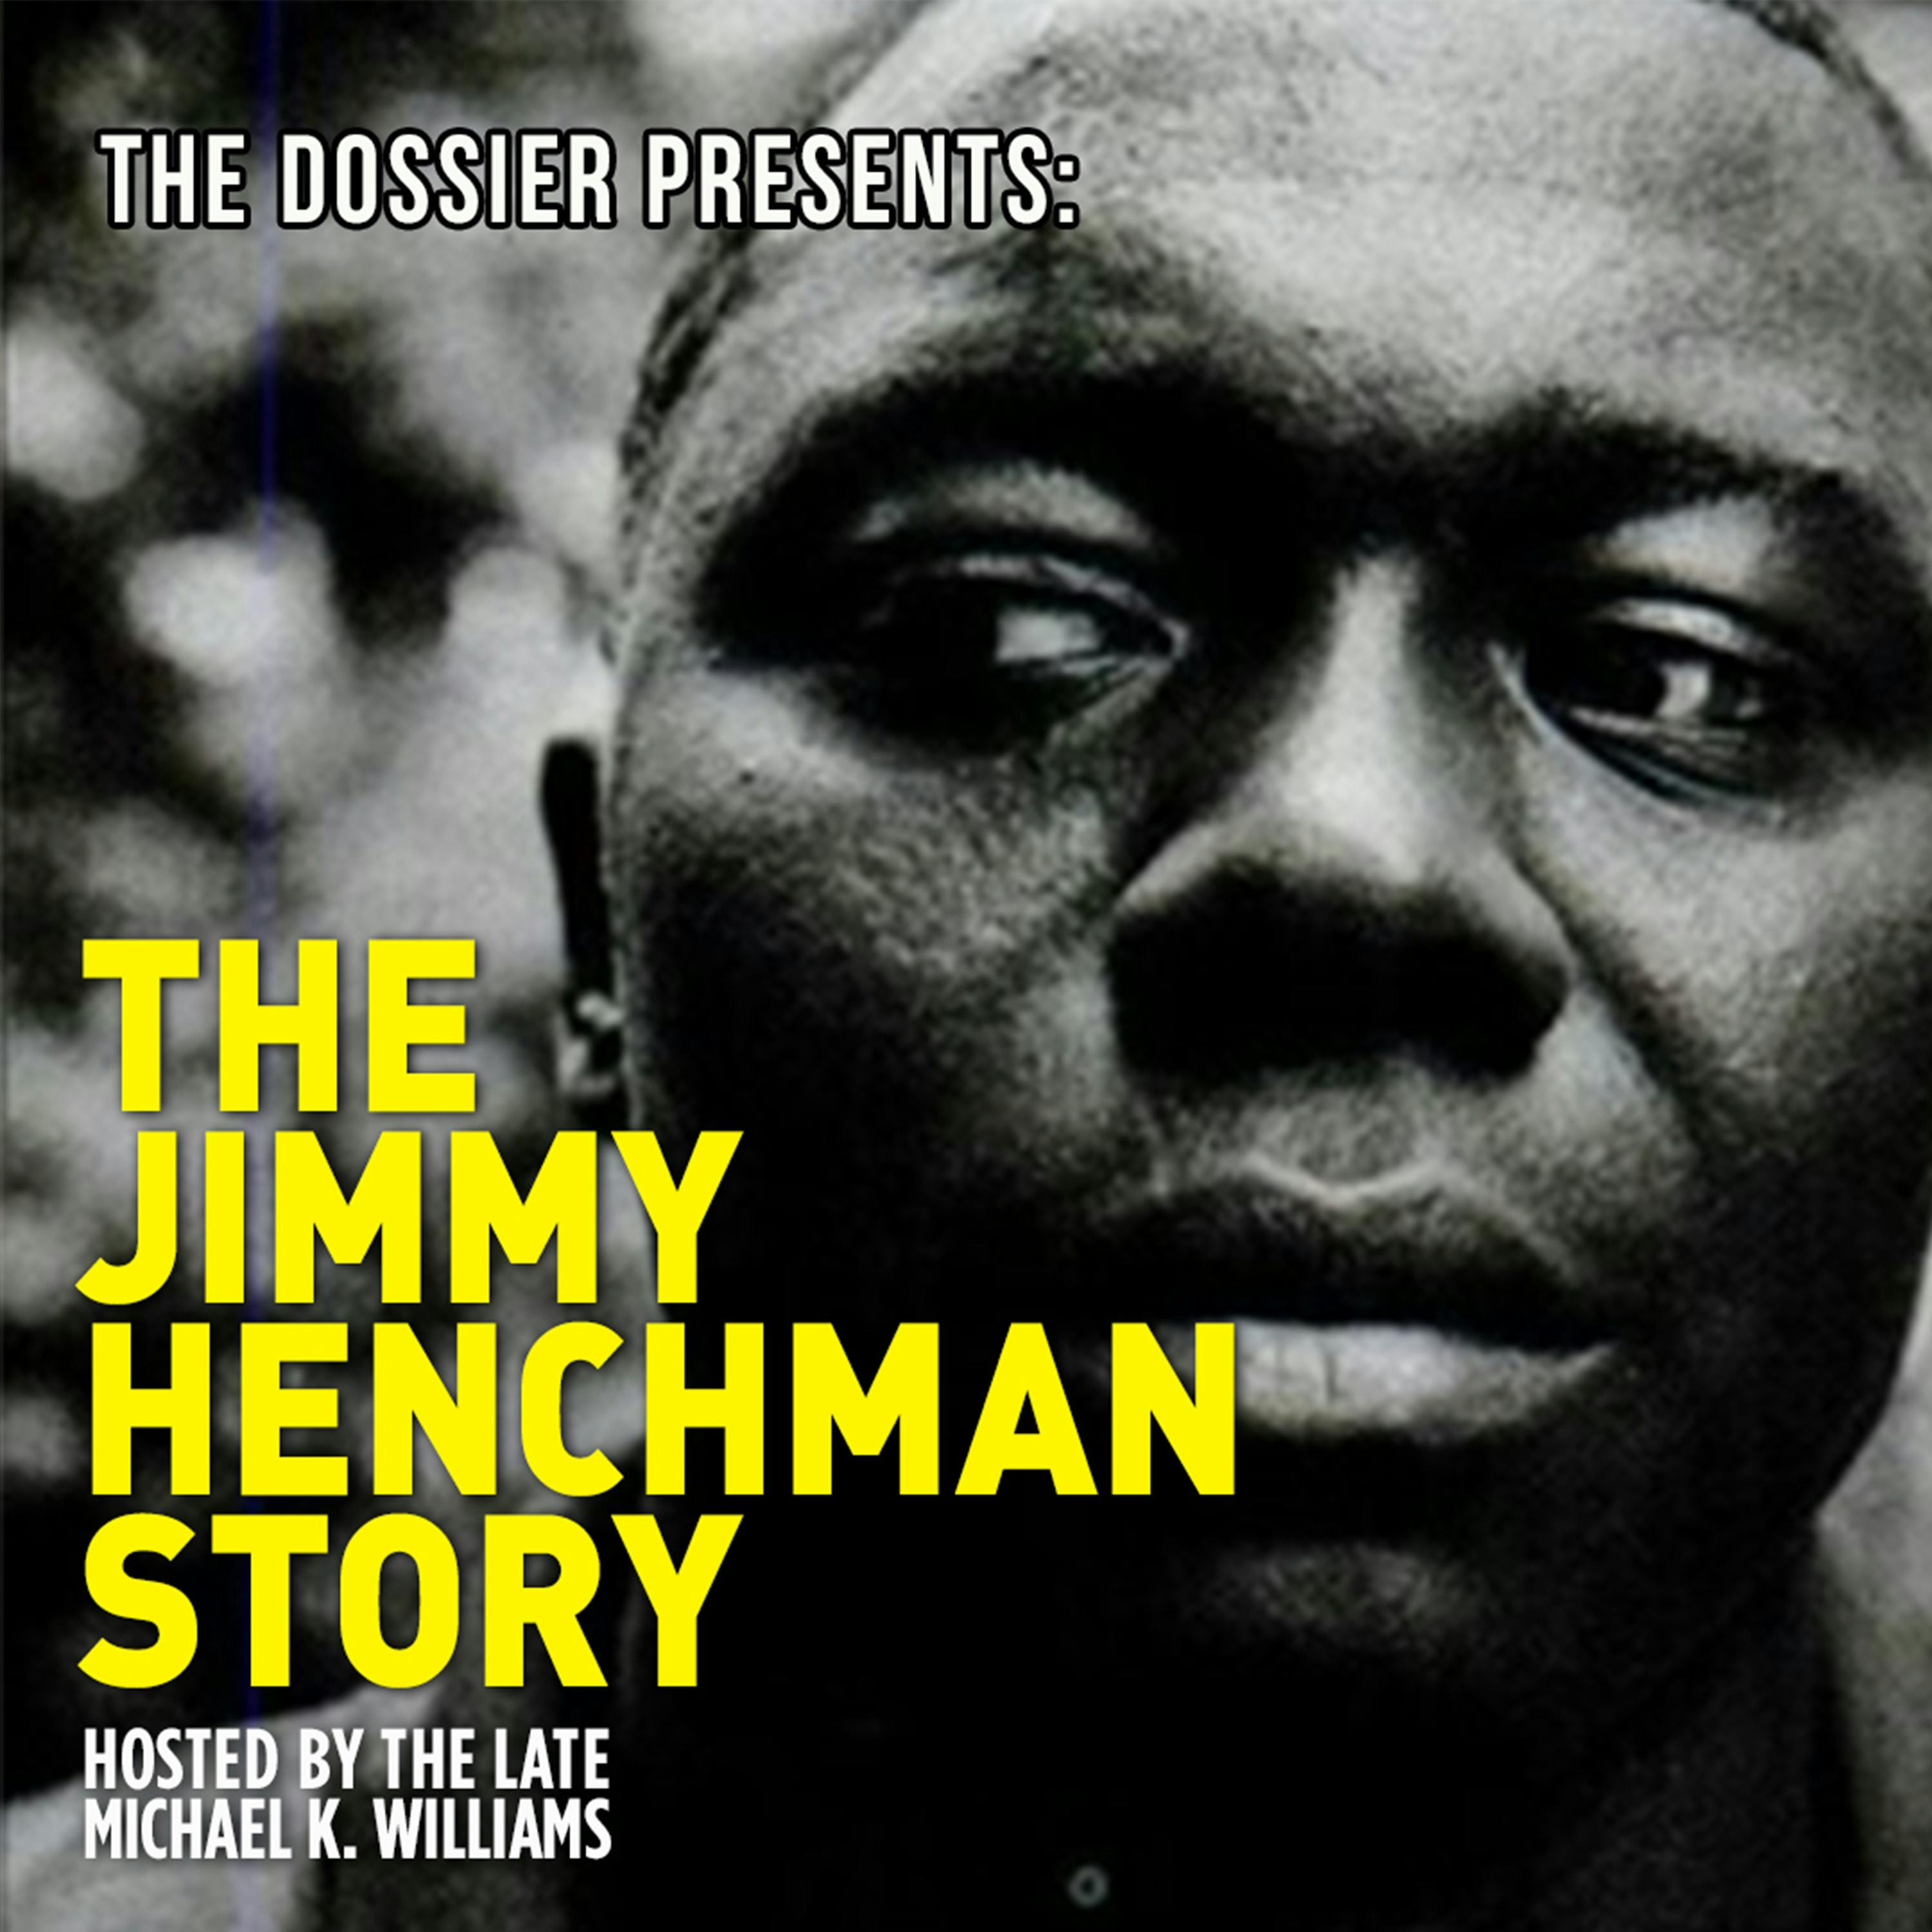 THE JIMMY HENCHMAN STORY - EP. 13 - MURDER TRIAL PT. 1